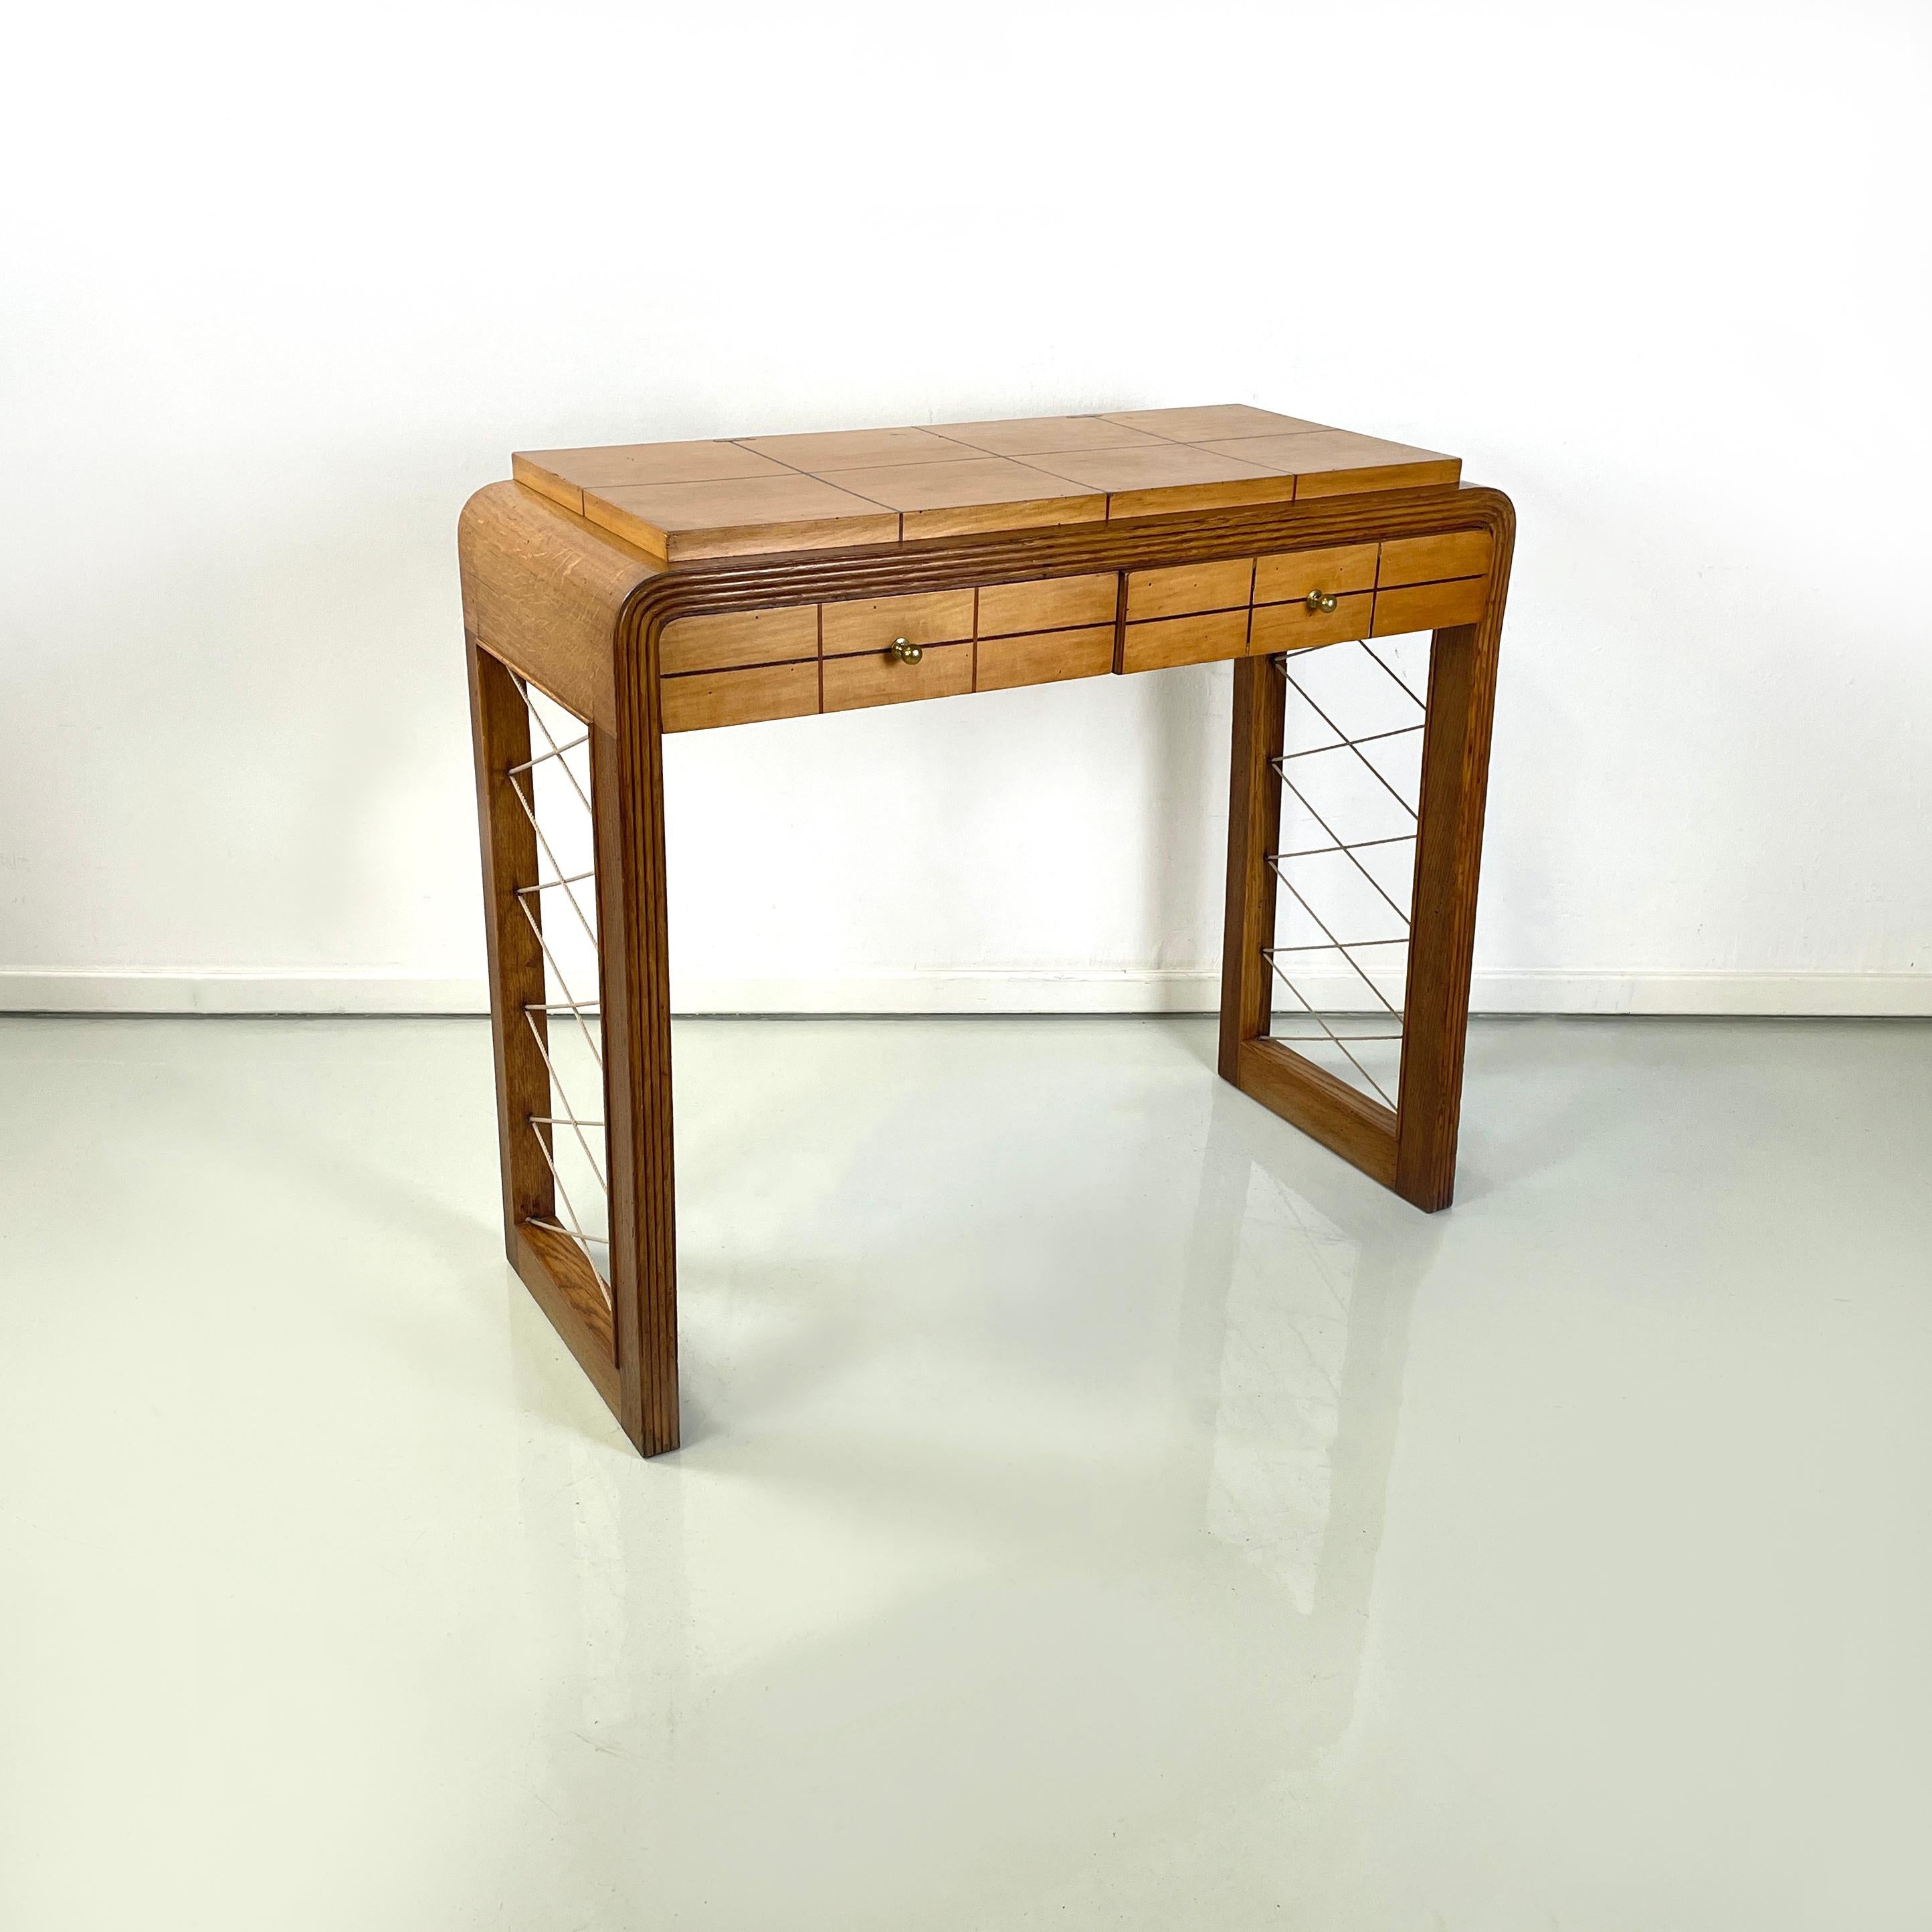 Italian art deco Console in wood with rope geometrical details, 1950s
Console table with rectangular wooden top with linear black wooden details. The wooden structure has a breadcrumb on the front and rounded corners. On the front it has two drawers